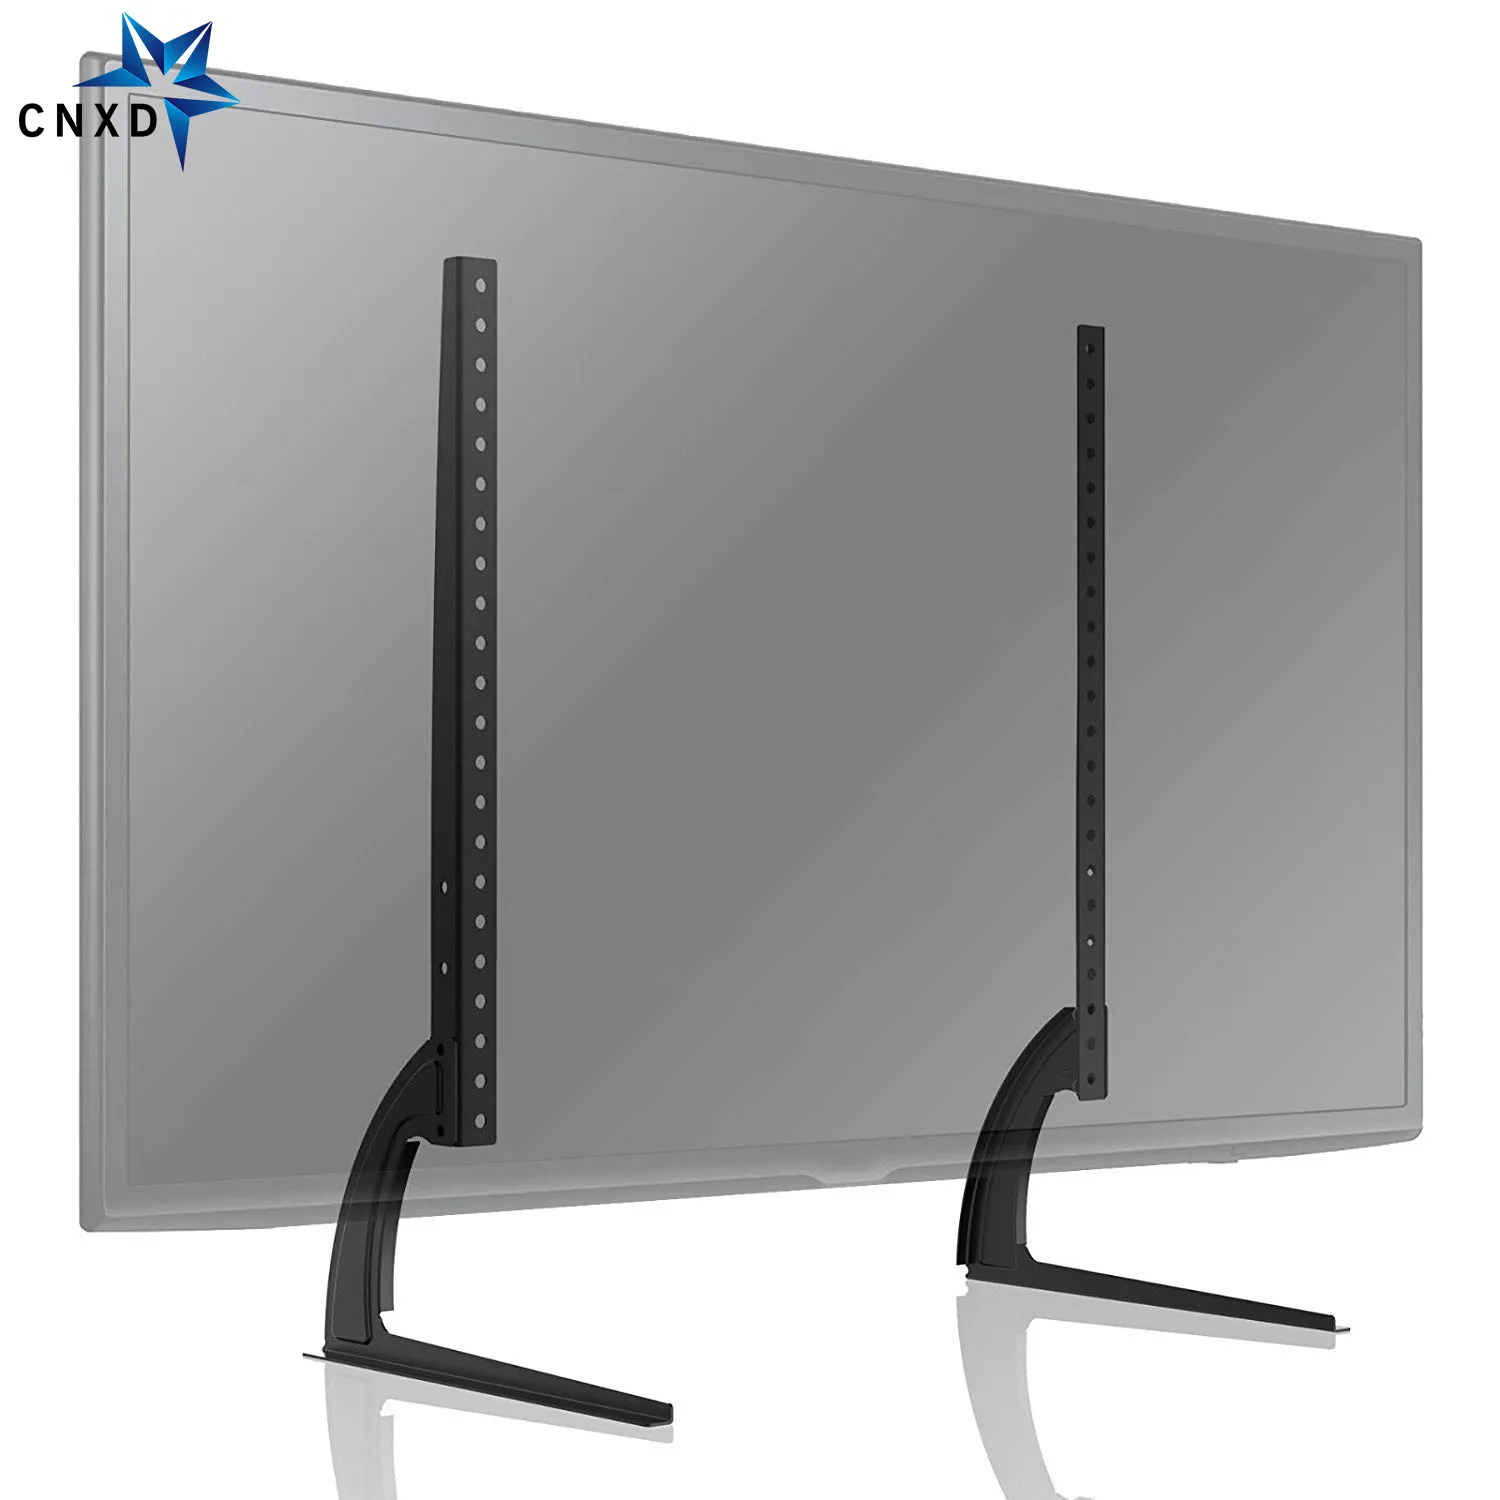 Table Top Universal TV Stand Desktop TV Riser Monitor Stands For 32 to 50 inch 